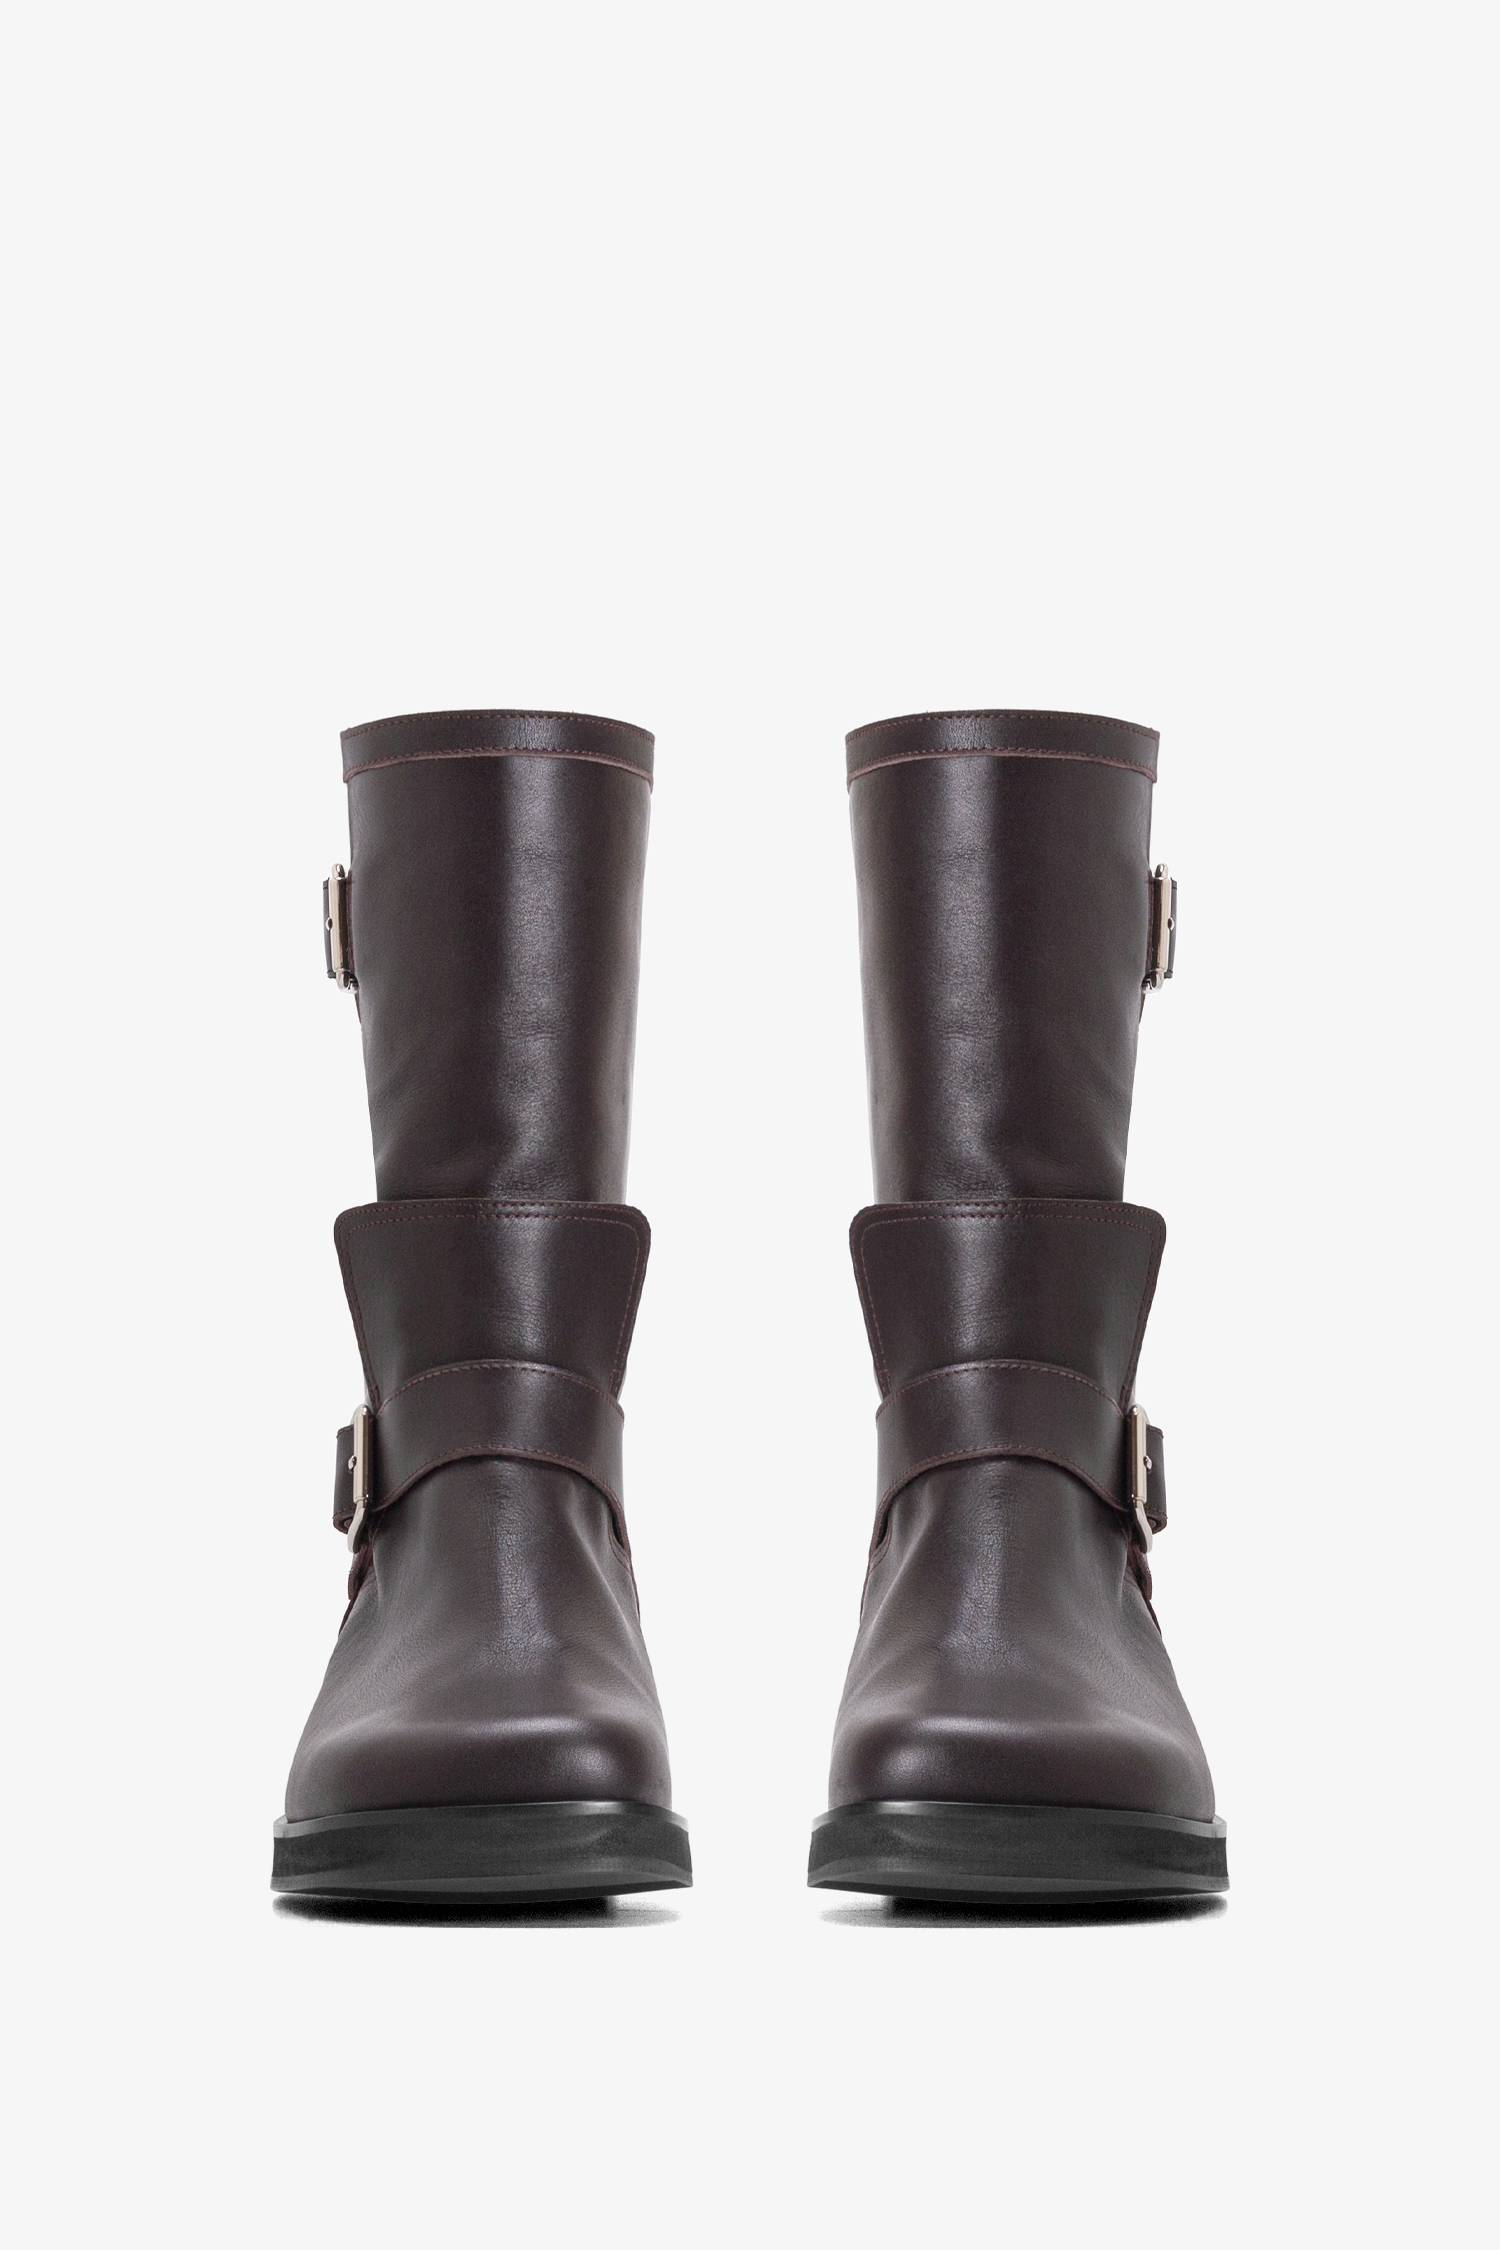 Iconic Biker Boots in Mud Brown